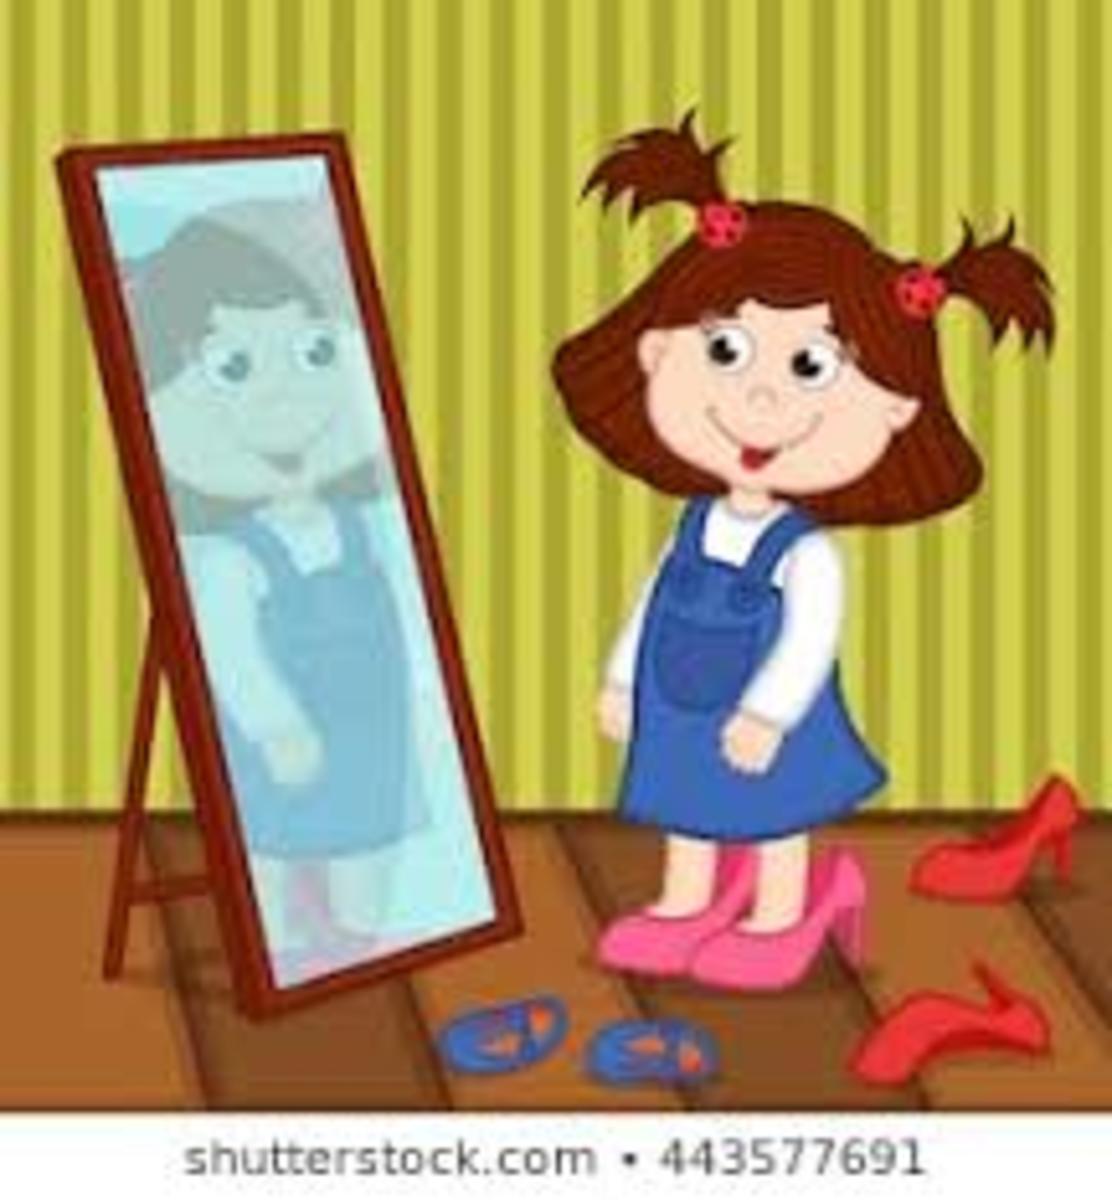 Mirror! Mirror! on the Wall--a Kids Poem